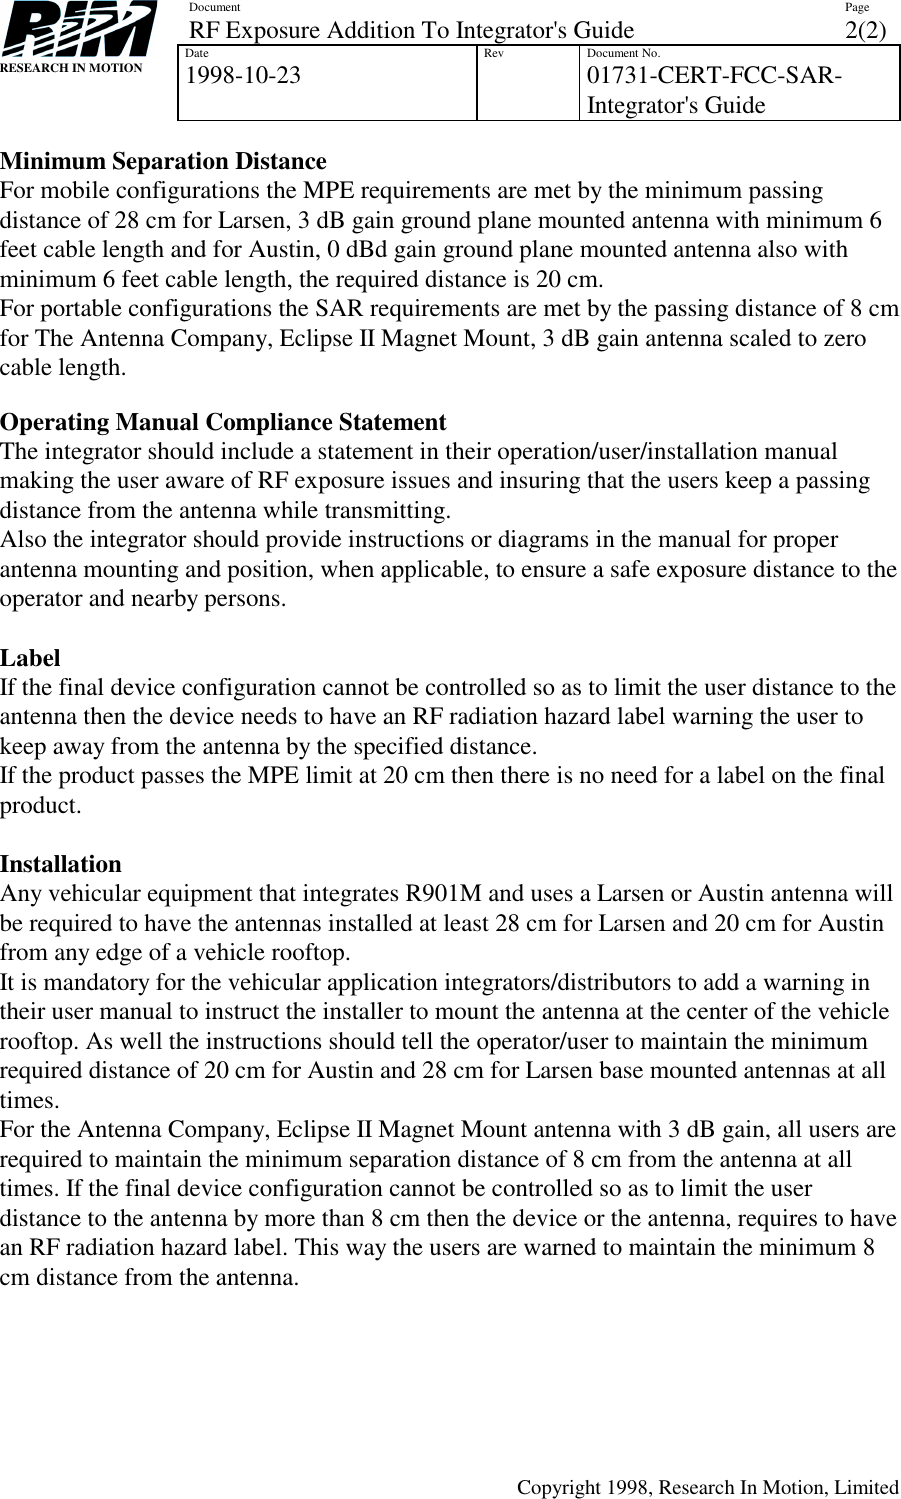 DocumentRF Exposure Addition To Integrator&apos;s Guide Page2(2)Date1998-10-23 Rev Document No.01731-CERT-FCC-SAR-Integrator&apos;s GuideCopyright 1998, Research In Motion, LimitedRESEARCH IN MOTIONMinimum Separation DistanceFor mobile configurations the MPE requirements are met by the minimum passingdistance of 28 cm for Larsen, 3 dB gain ground plane mounted antenna with minimum 6feet cable length and for Austin, 0 dBd gain ground plane mounted antenna also withminimum 6 feet cable length, the required distance is 20 cm.For portable configurations the SAR requirements are met by the passing distance of 8 cmfor The Antenna Company, Eclipse II Magnet Mount, 3 dB gain antenna scaled to zerocable length.Operating Manual Compliance StatementThe integrator should include a statement in their operation/user/installation manualmaking the user aware of RF exposure issues and insuring that the users keep a passingdistance from the antenna while transmitting.Also the integrator should provide instructions or diagrams in the manual for properantenna mounting and position, when applicable, to ensure a safe exposure distance to theoperator and nearby persons.LabelIf the final device configuration cannot be controlled so as to limit the user distance to theantenna then the device needs to have an RF radiation hazard label warning the user tokeep away from the antenna by the specified distance.If the product passes the MPE limit at 20 cm then there is no need for a label on the finalproduct.InstallationAny vehicular equipment that integrates R901M and uses a Larsen or Austin antenna willbe required to have the antennas installed at least 28 cm for Larsen and 20 cm for Austinfrom any edge of a vehicle rooftop.It is mandatory for the vehicular application integrators/distributors to add a warning intheir user manual to instruct the installer to mount the antenna at the center of the vehiclerooftop. As well the instructions should tell the operator/user to maintain the minimumrequired distance of 20 cm for Austin and 28 cm for Larsen base mounted antennas at alltimes.For the Antenna Company, Eclipse II Magnet Mount antenna with 3 dB gain, all users arerequired to maintain the minimum separation distance of 8 cm from the antenna at alltimes. If the final device configuration cannot be controlled so as to limit the userdistance to the antenna by more than 8 cm then the device or the antenna, requires to havean RF radiation hazard label. This way the users are warned to maintain the minimum 8cm distance from the antenna.